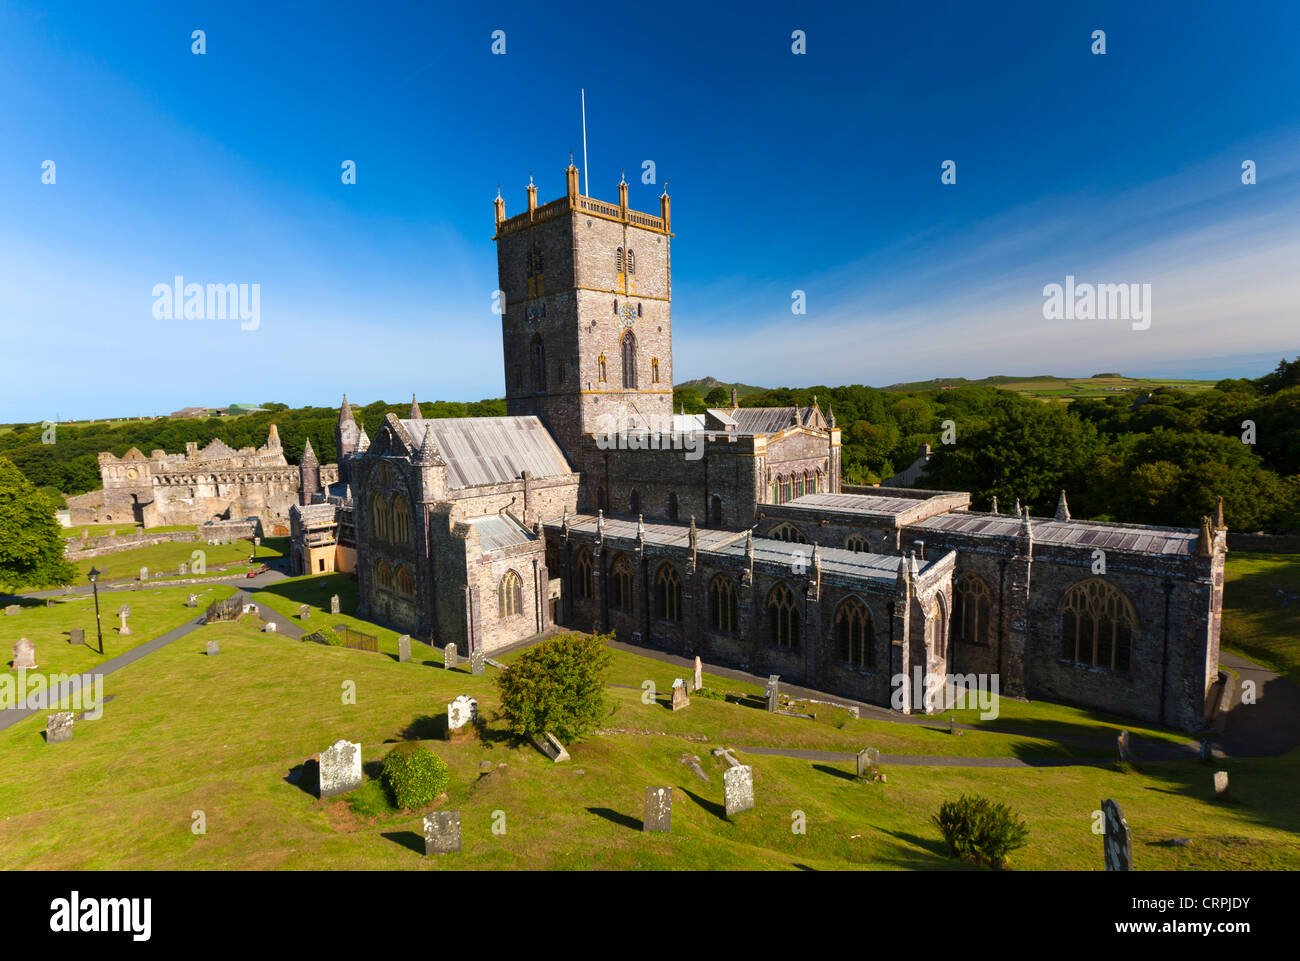 St David's Cathedral, built in the 12th century and the ruin of the Bishop's Palace. St David's is the smallest city in Great Br Stock Photo